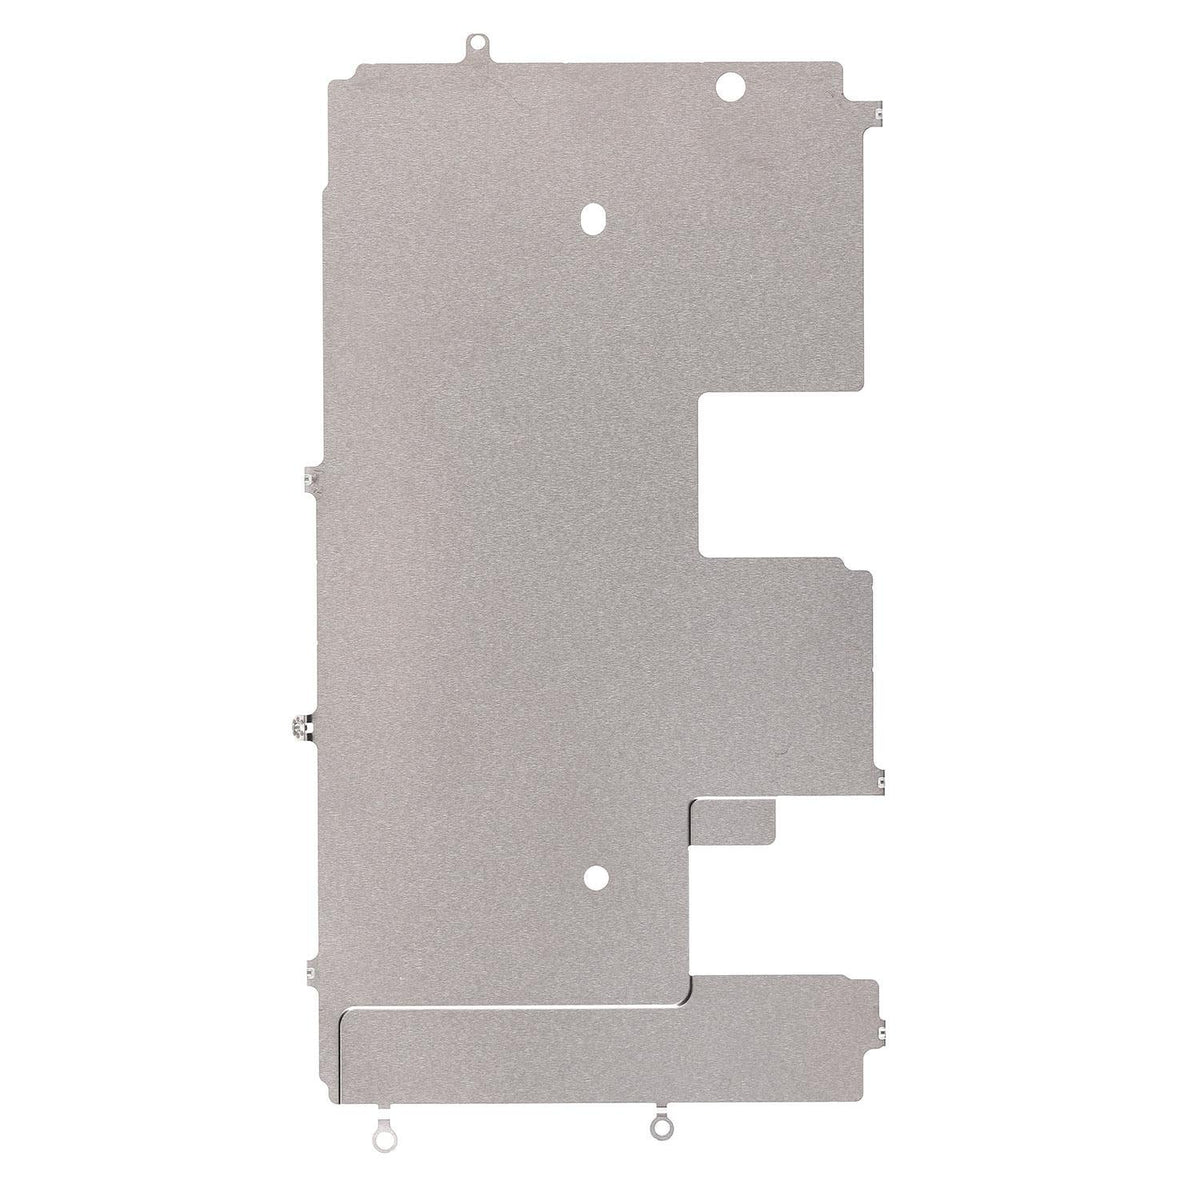 LCD SHIELD PLATE FOR IPHONE 8